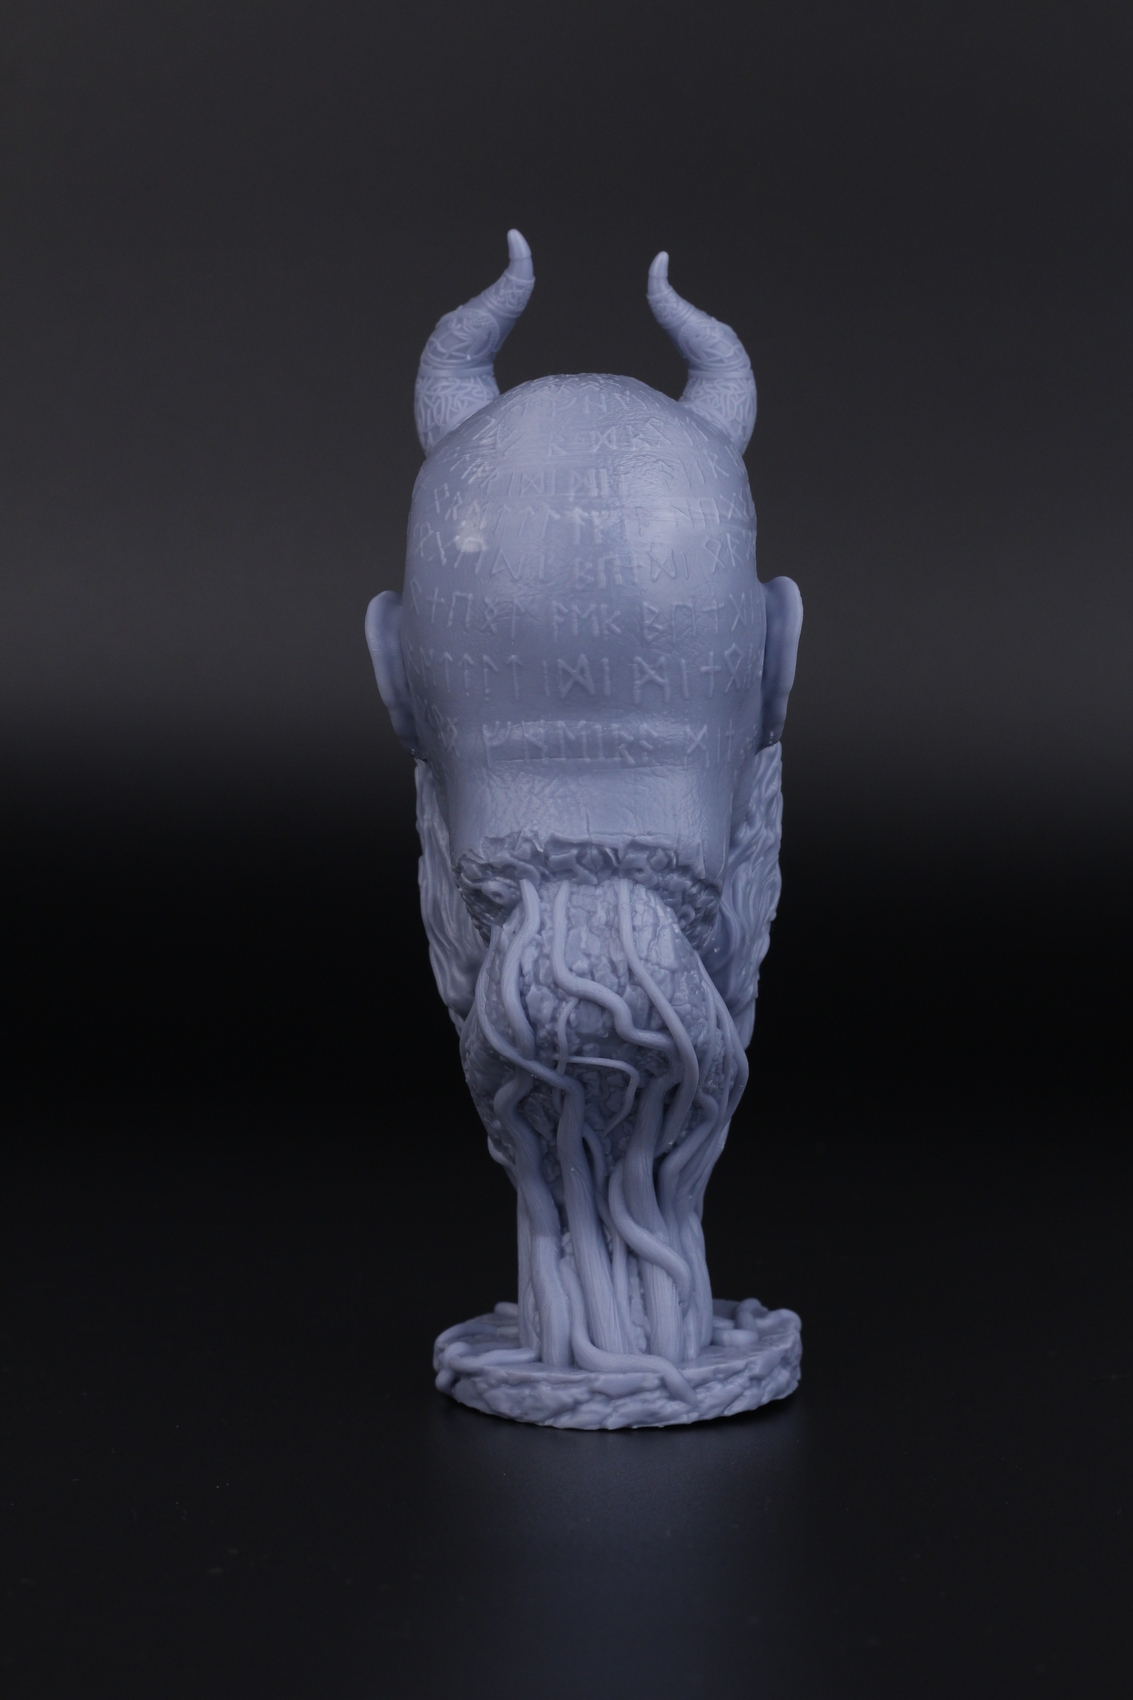 Mimir Bust from Fotis Mint printed on Anycubic Photon M34 | Anycubic Photon M3 Review: Bridging the gap